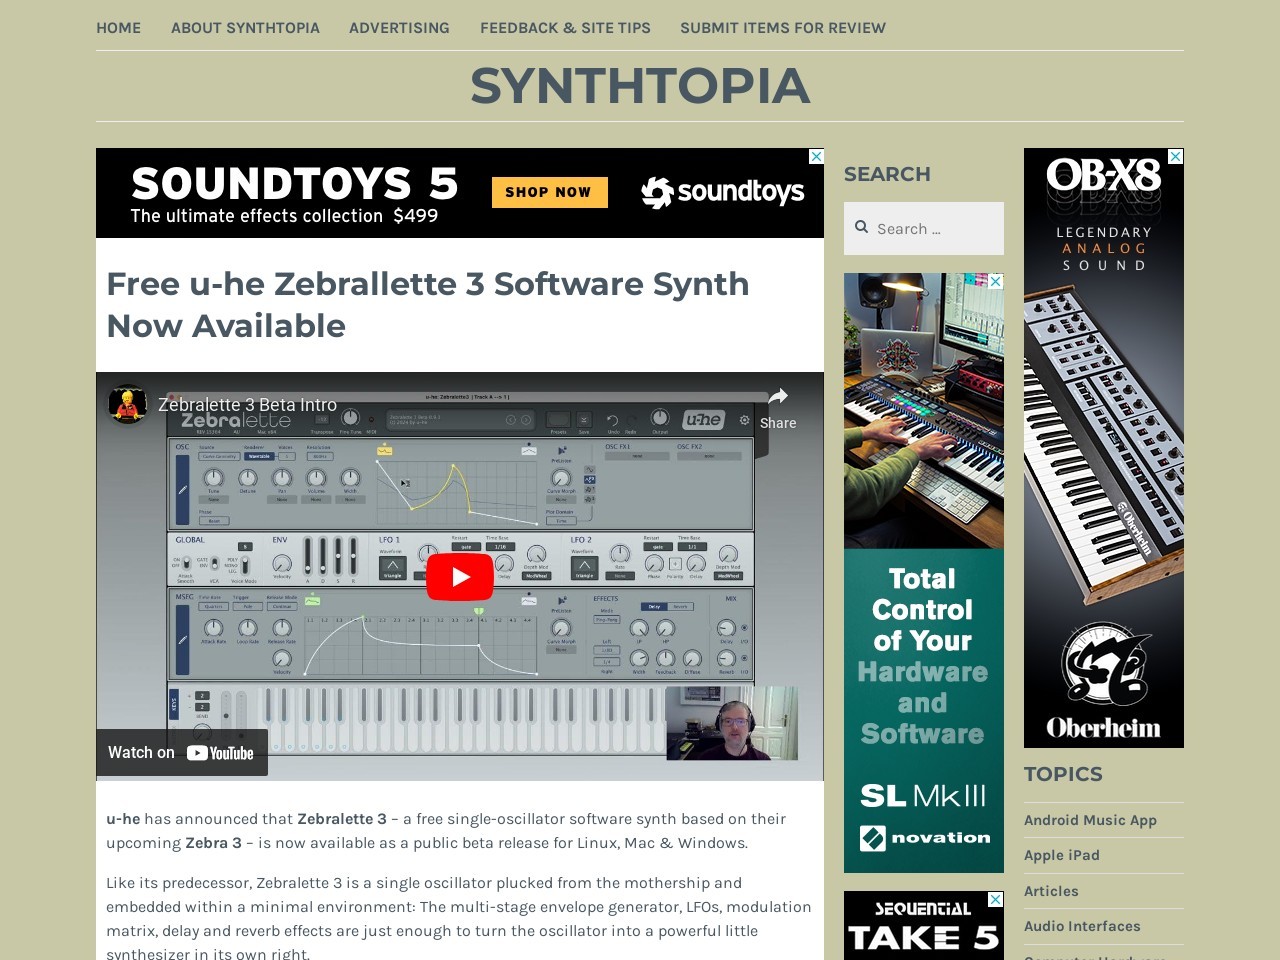 Free u-he Zebrallette 3 Software Synth Now Available – Synthtopia